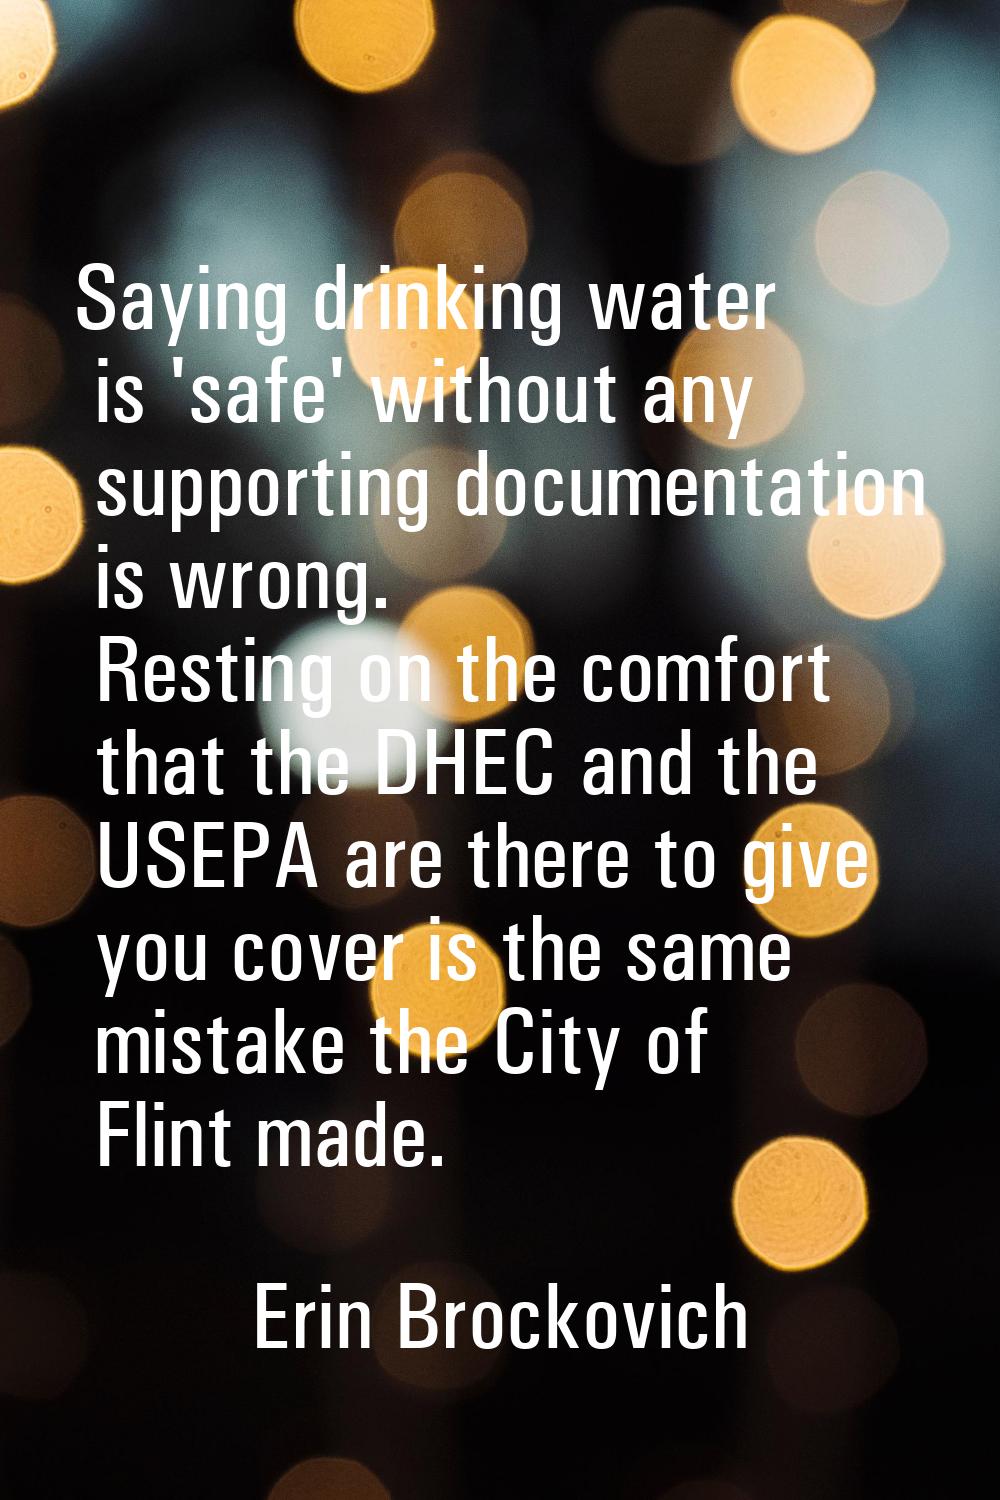 Saying drinking water is 'safe' without any supporting documentation is wrong. Resting on the comfo